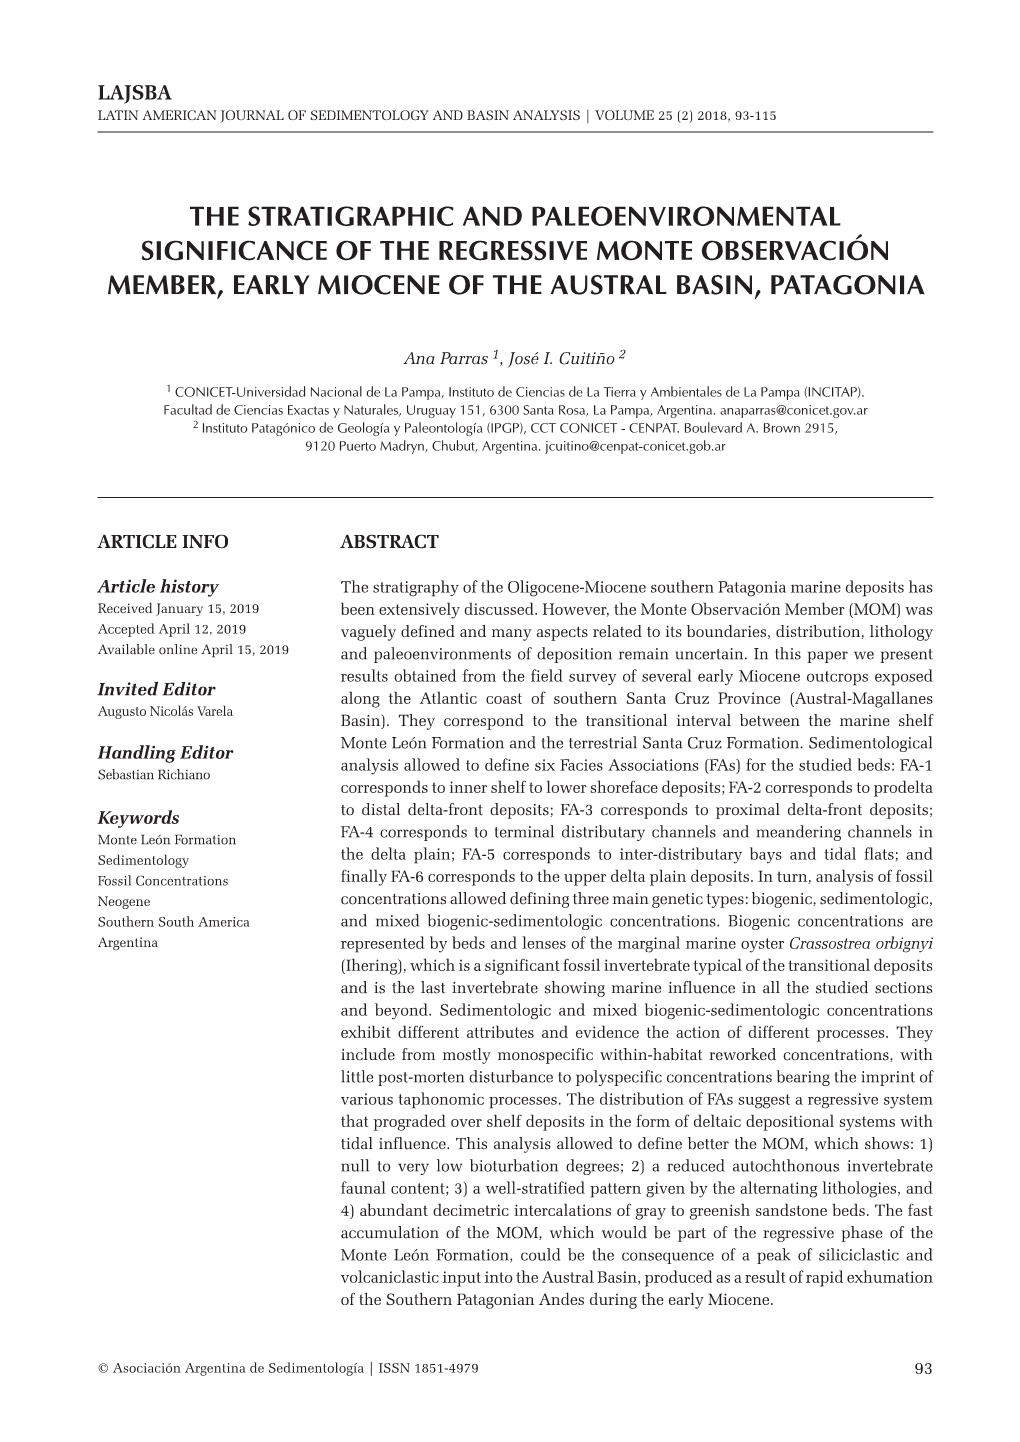 The Stratigraphic and Paleoenvironmental Significance of the Regressive Monte Observación Member, Early Miocene of the Austral Basin, Patagonia